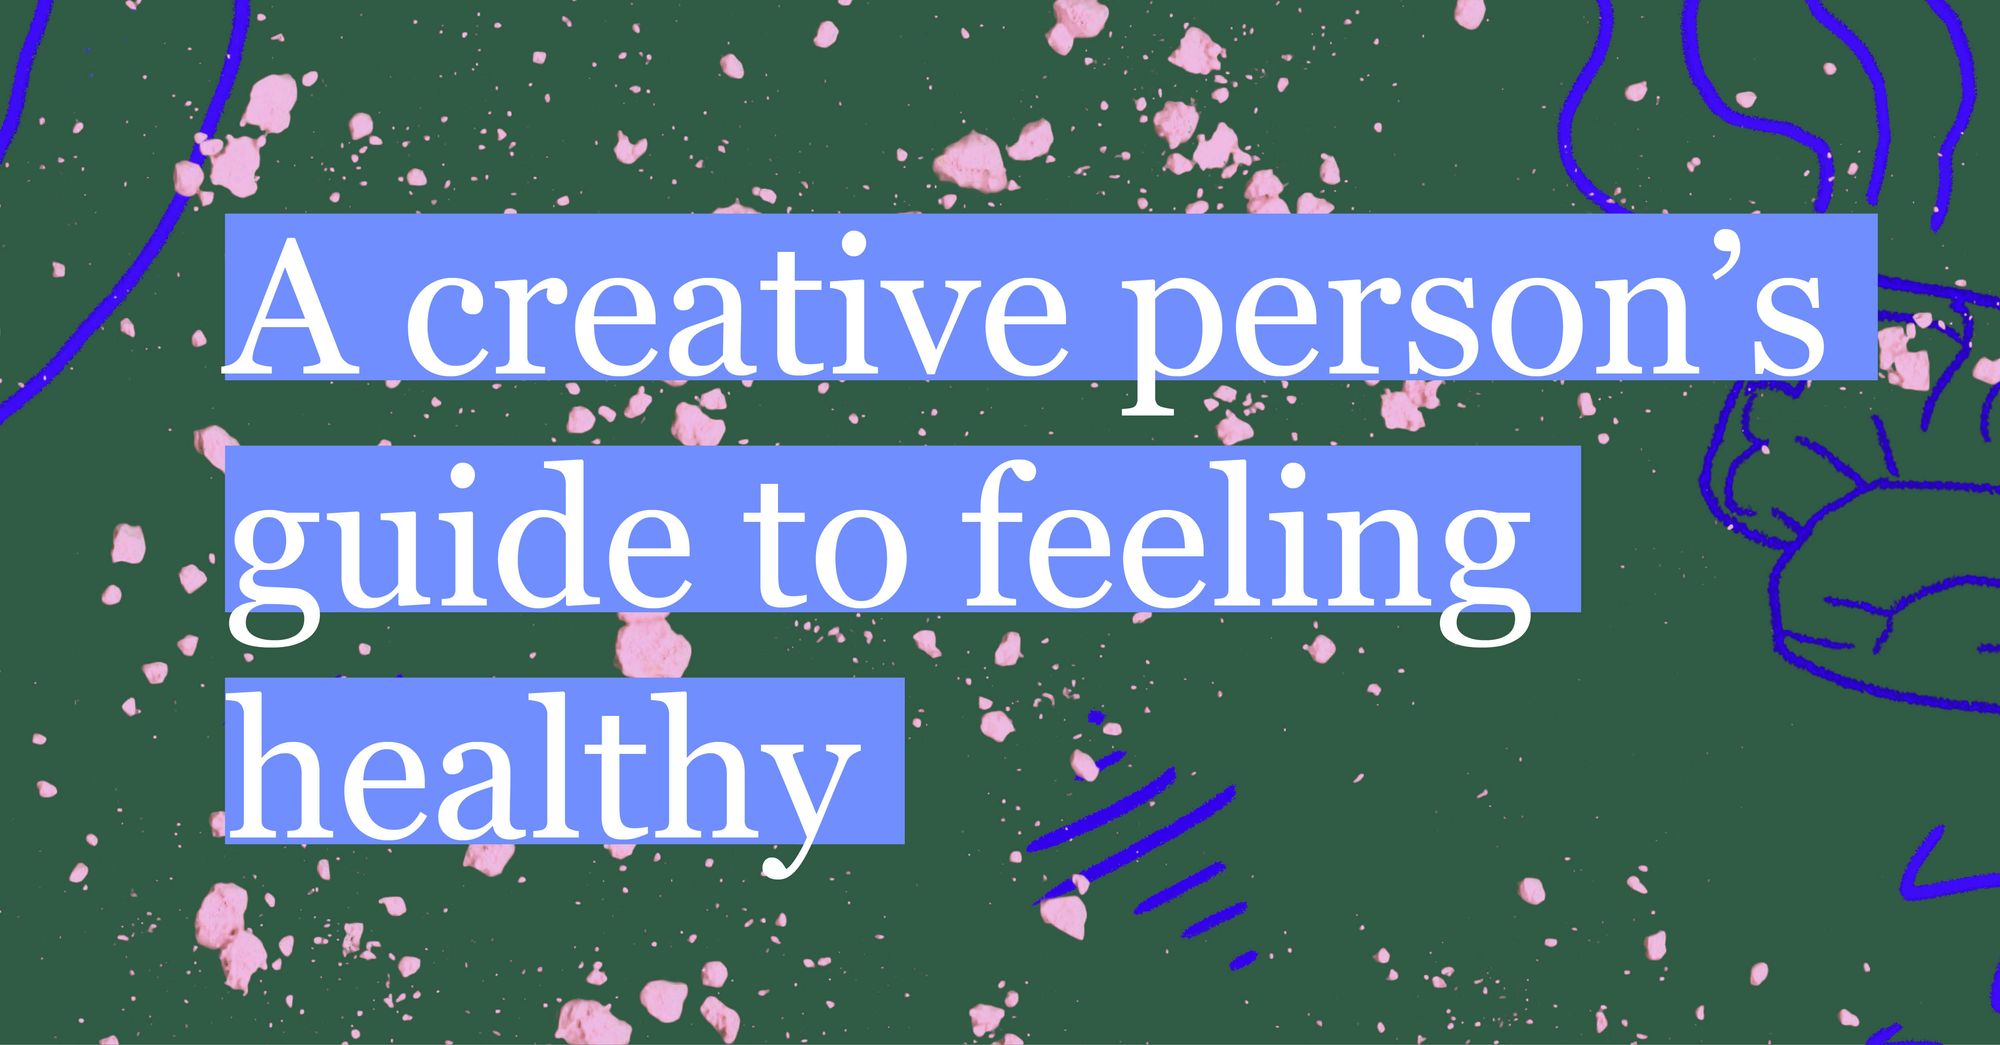 A creative person’s guide to feeling healthy